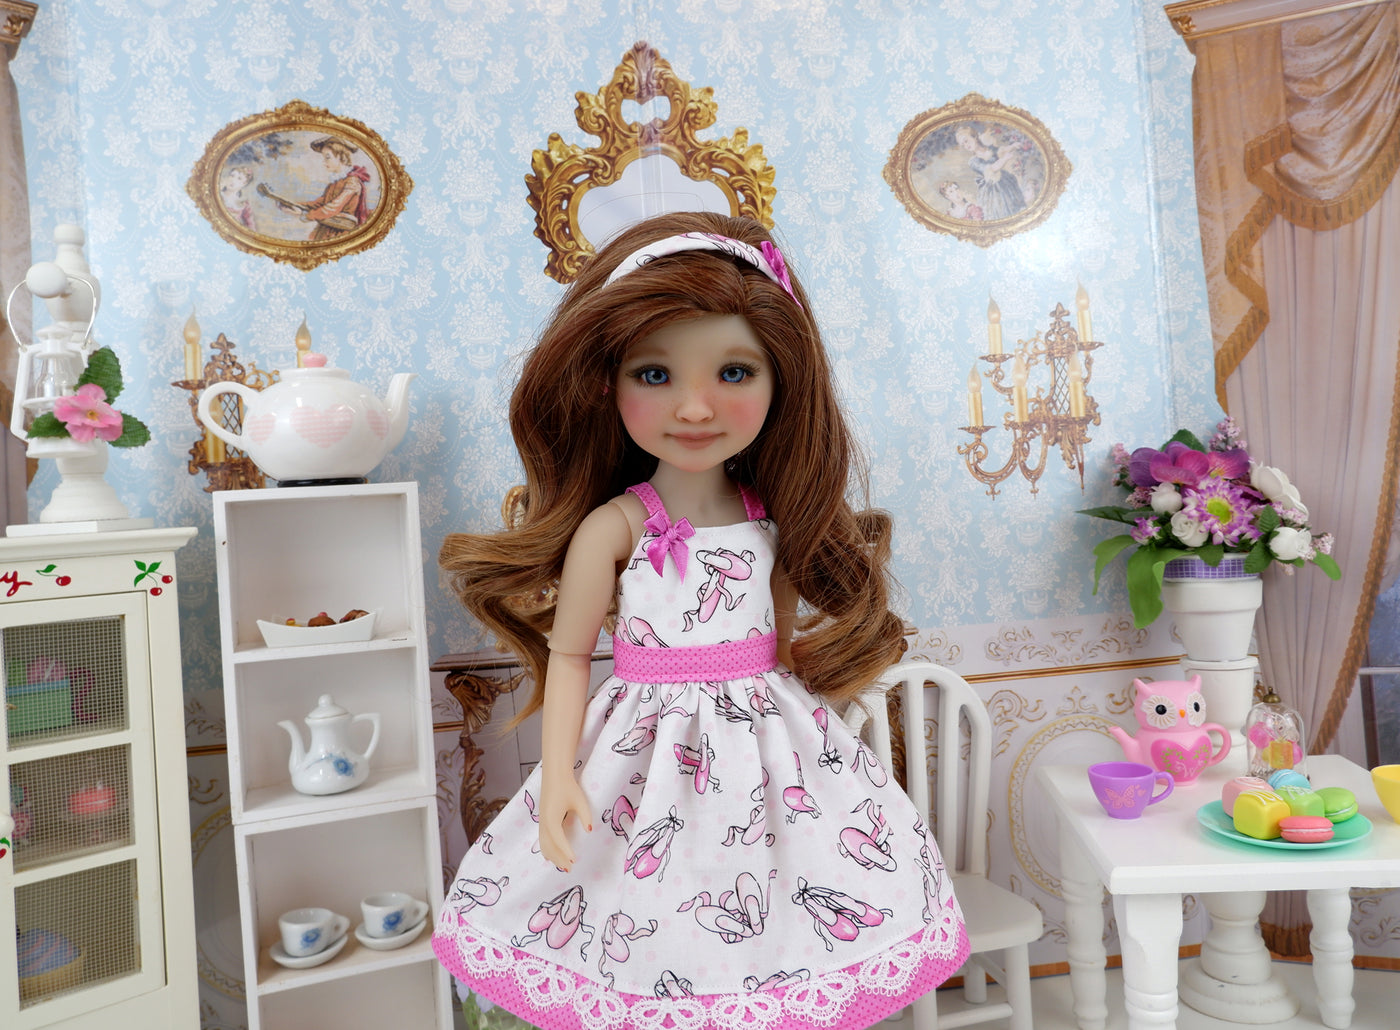 Ballerina Slippers - dress with shoes for Ruby Red Fashion Friends doll